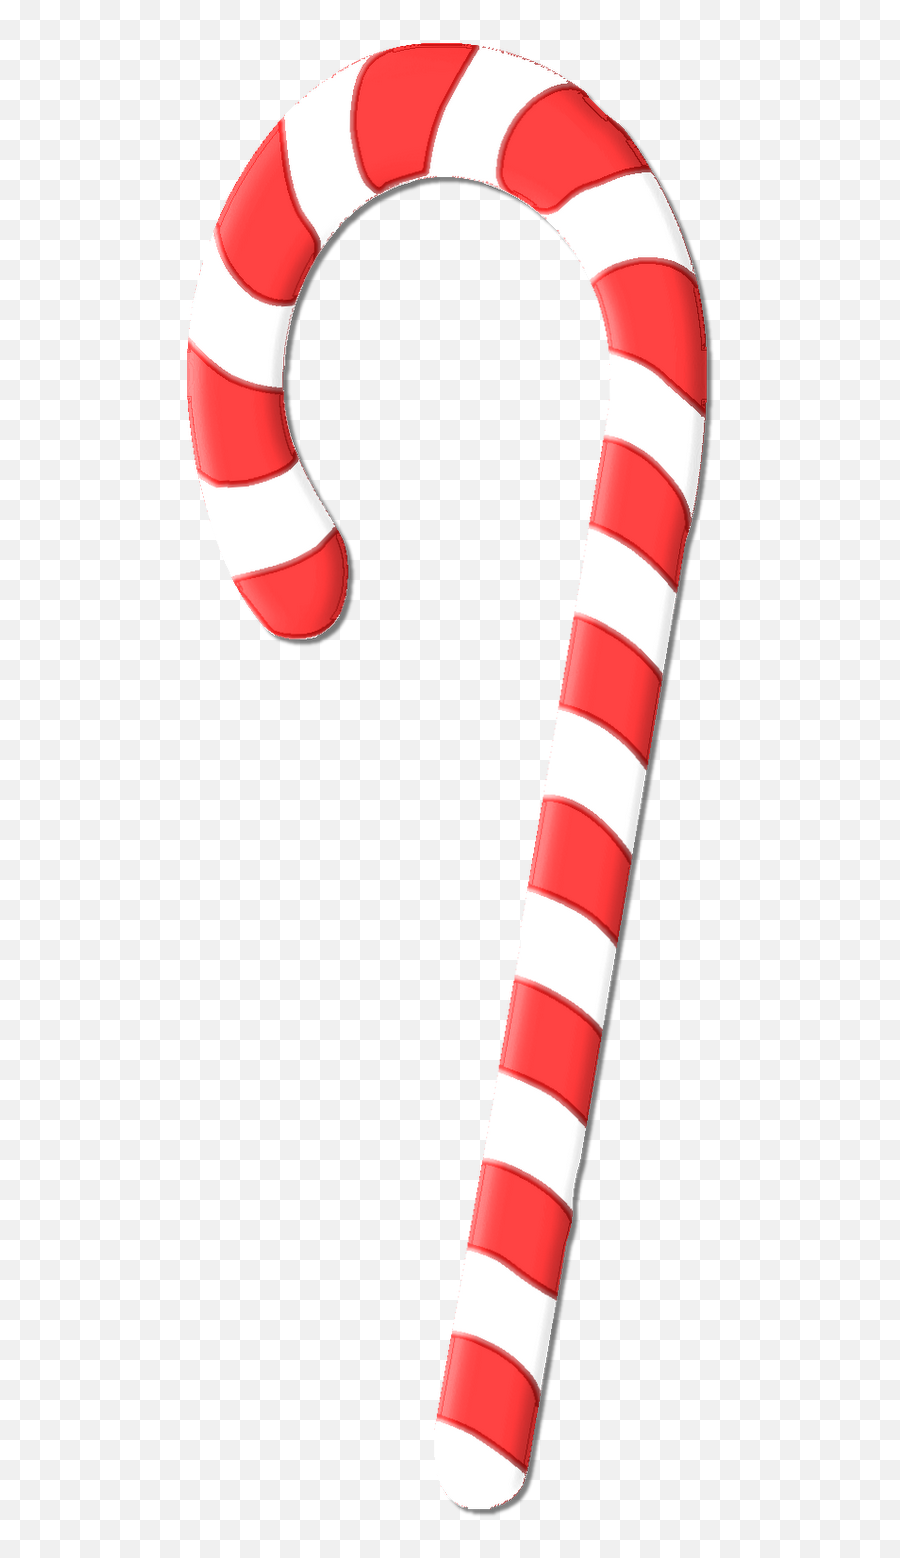 Candy Cane Product Font Line - Line Png Download 7951600 Candy Canes On A Line,Cane Png